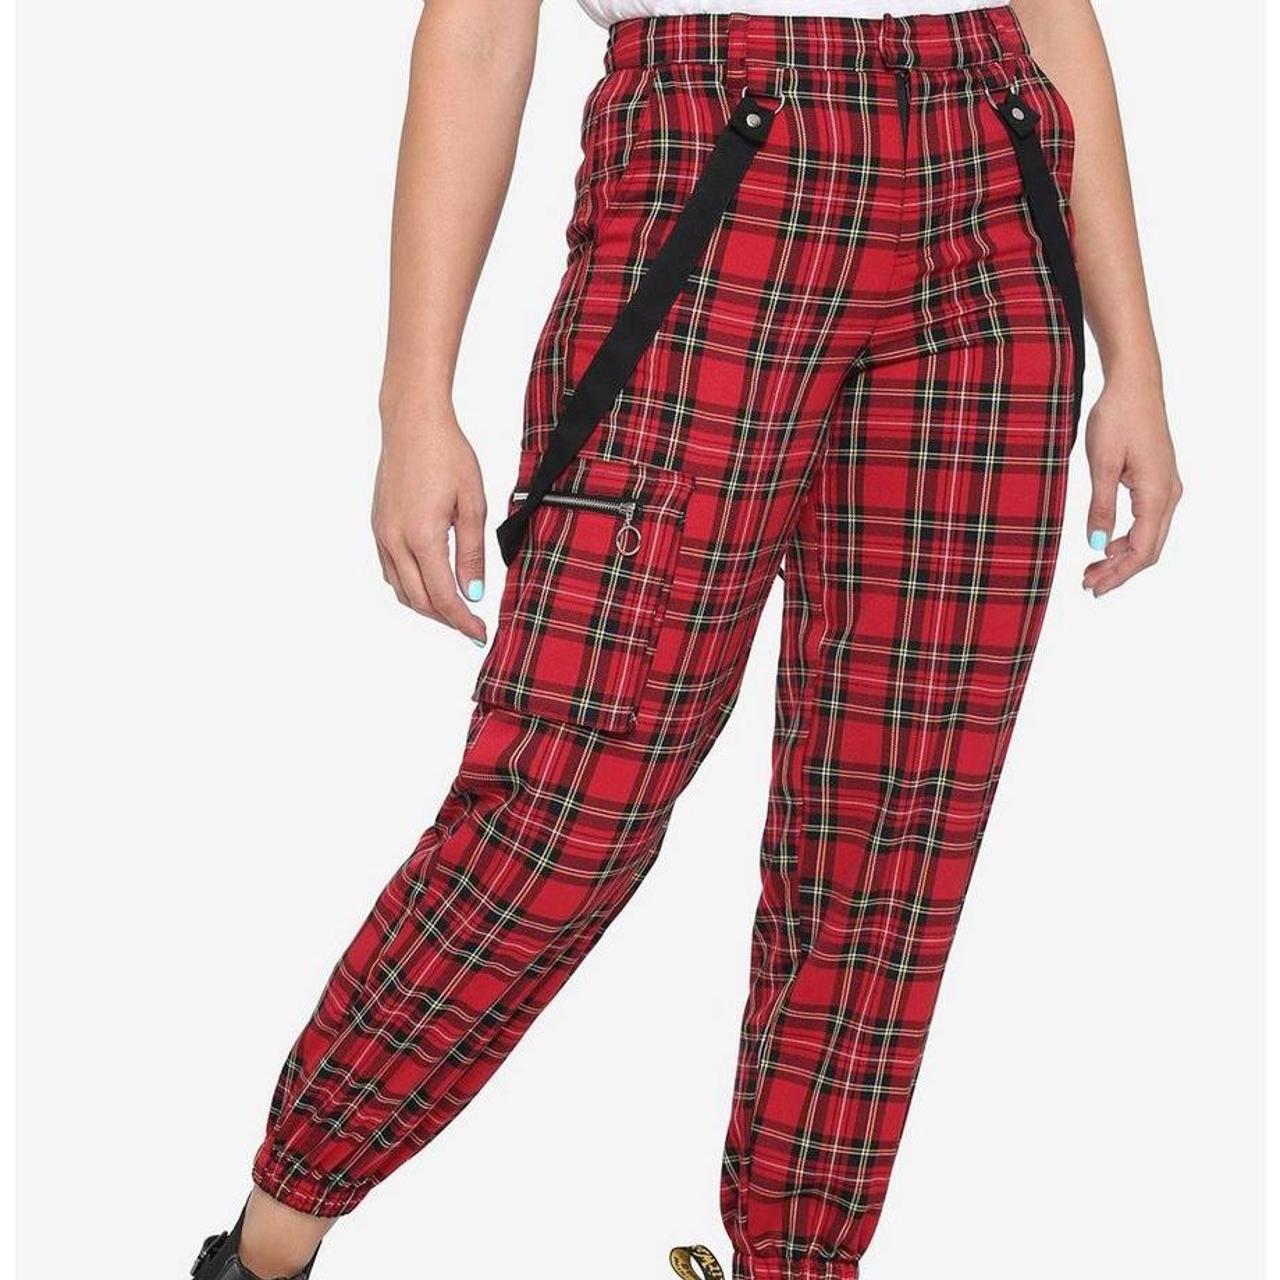 Full-Length Red/Green Check Brushed Plain-Weave Trousers | Intimissimi